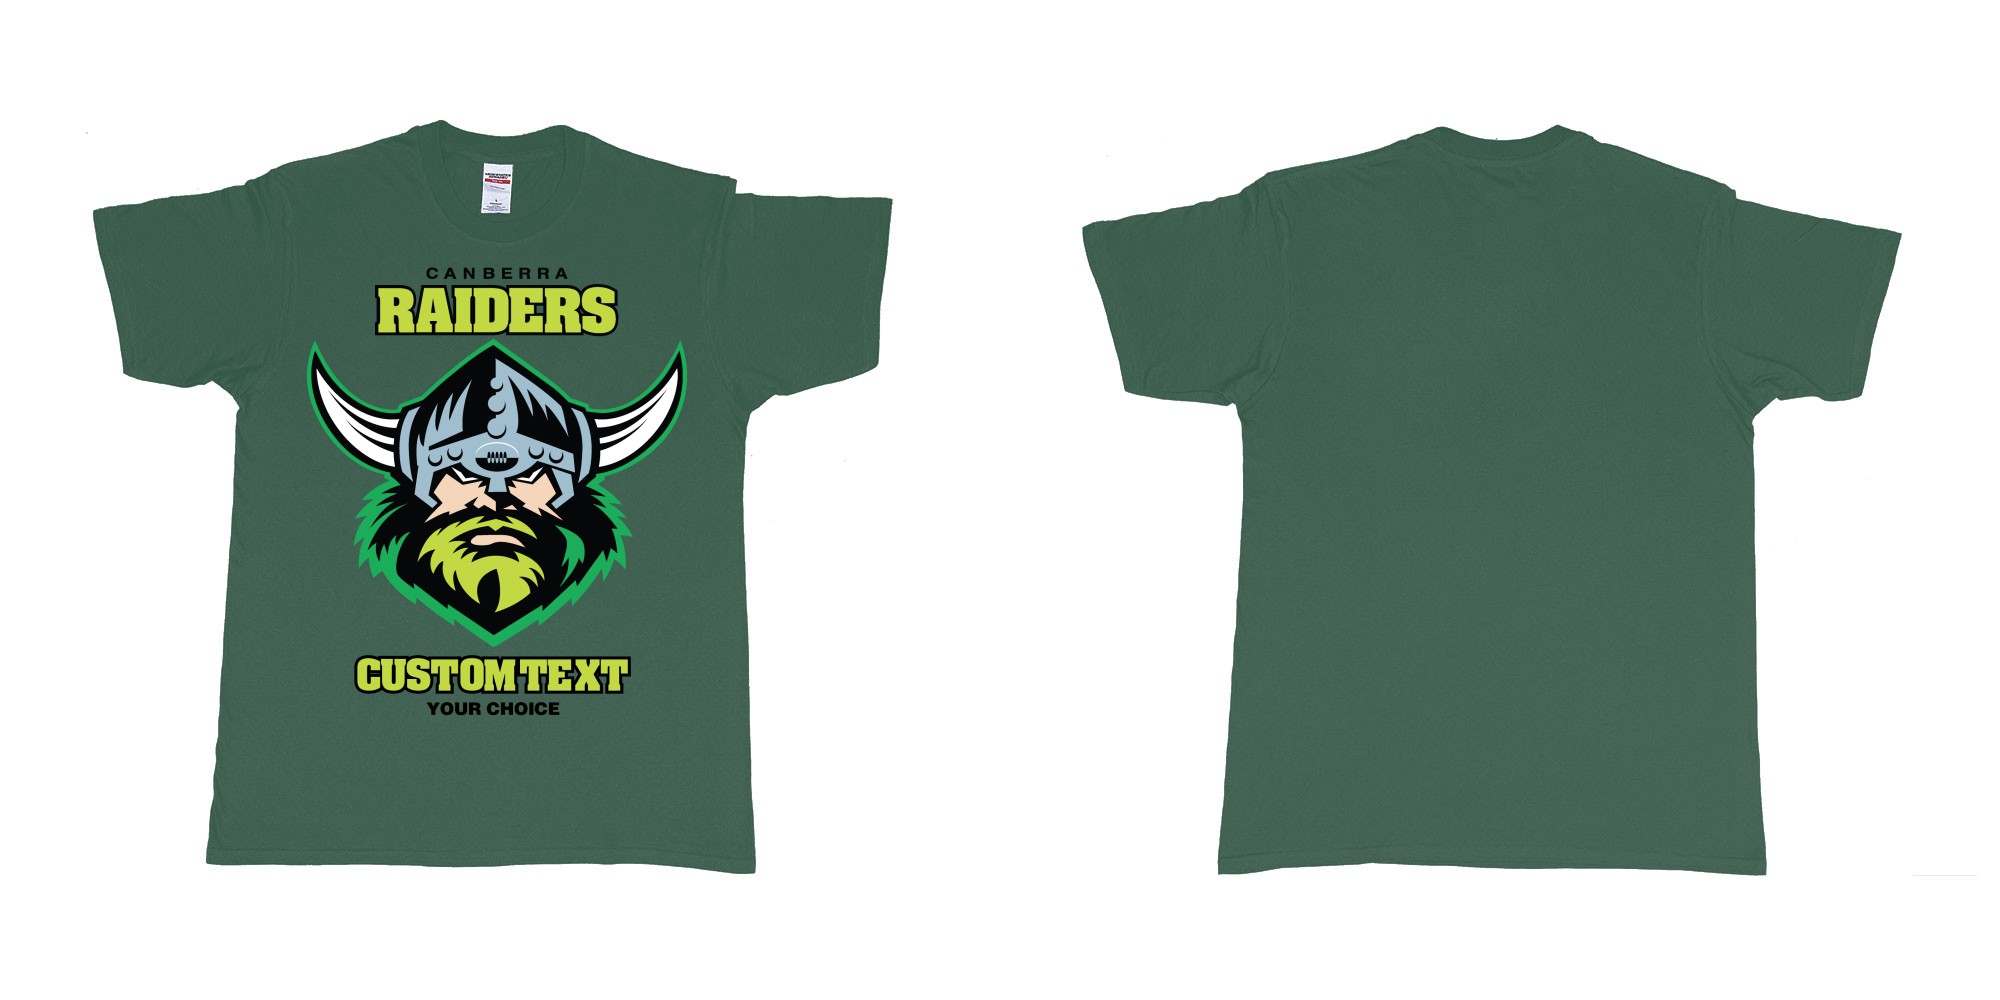 Custom tshirt design canberra raiders nrl logo own printed text near you in fabric color forest-green choice your own text made in Bali by The Pirate Way